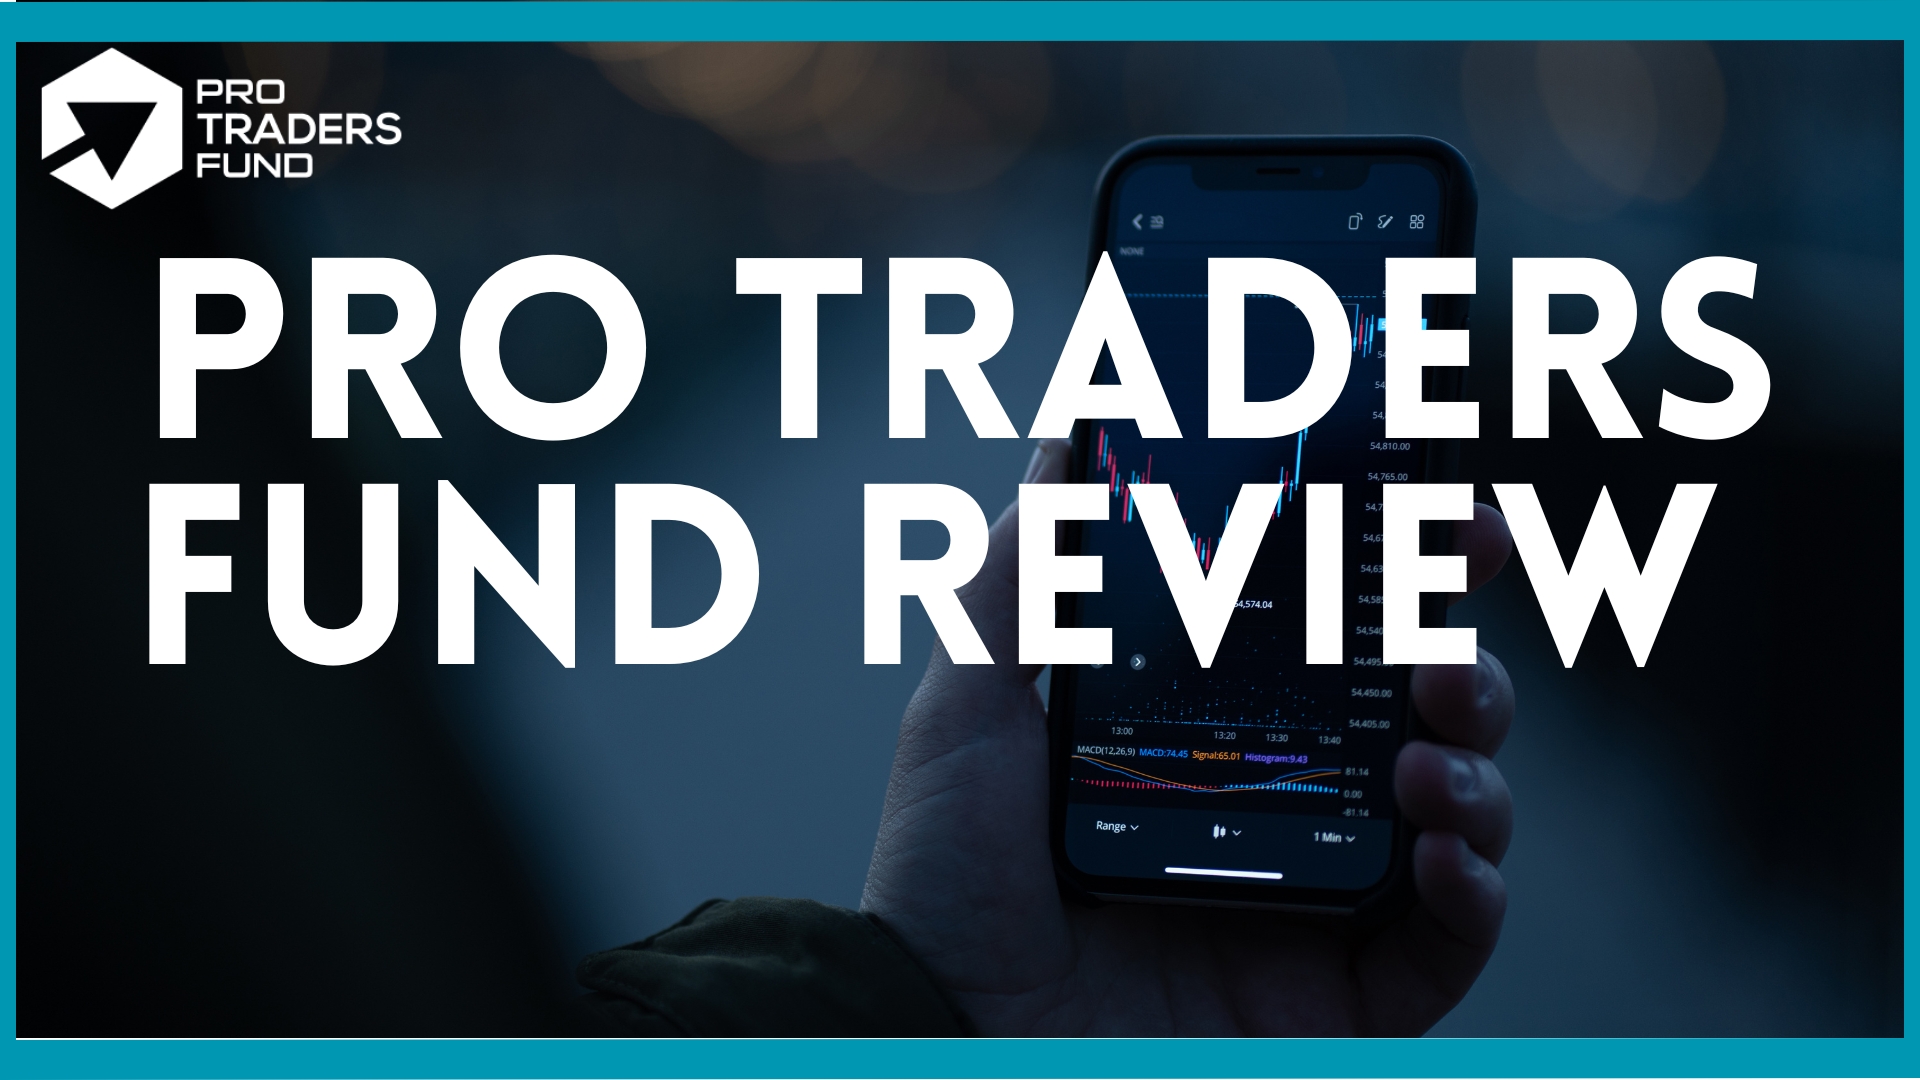 Pro Traders Fund Review